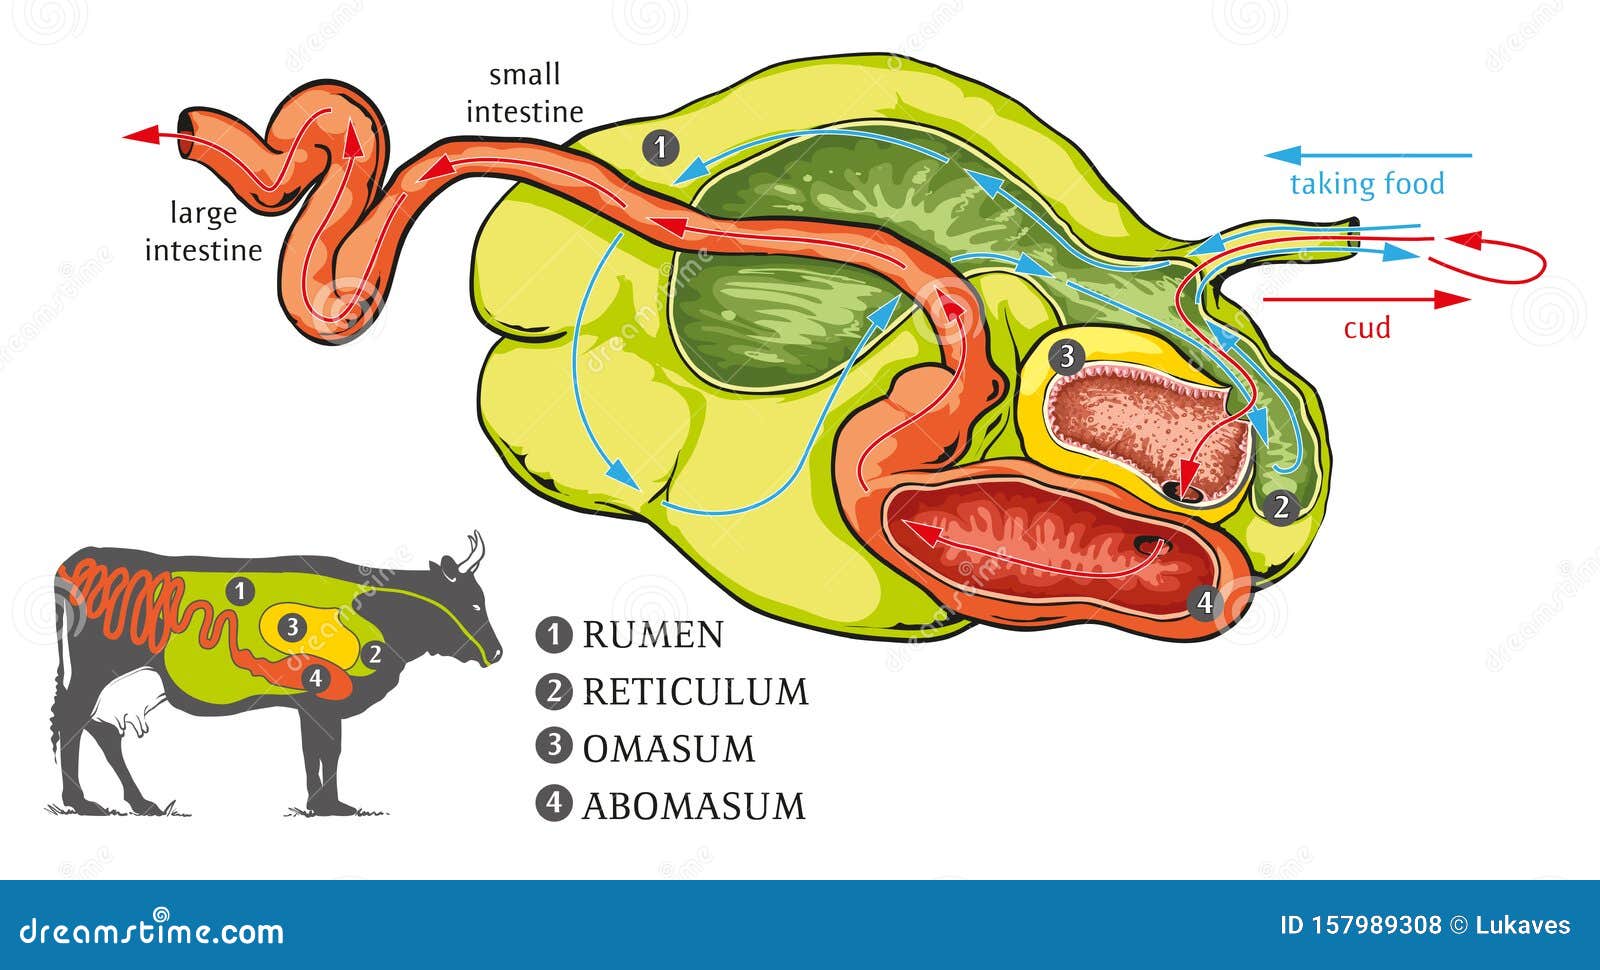 the cow stomach system